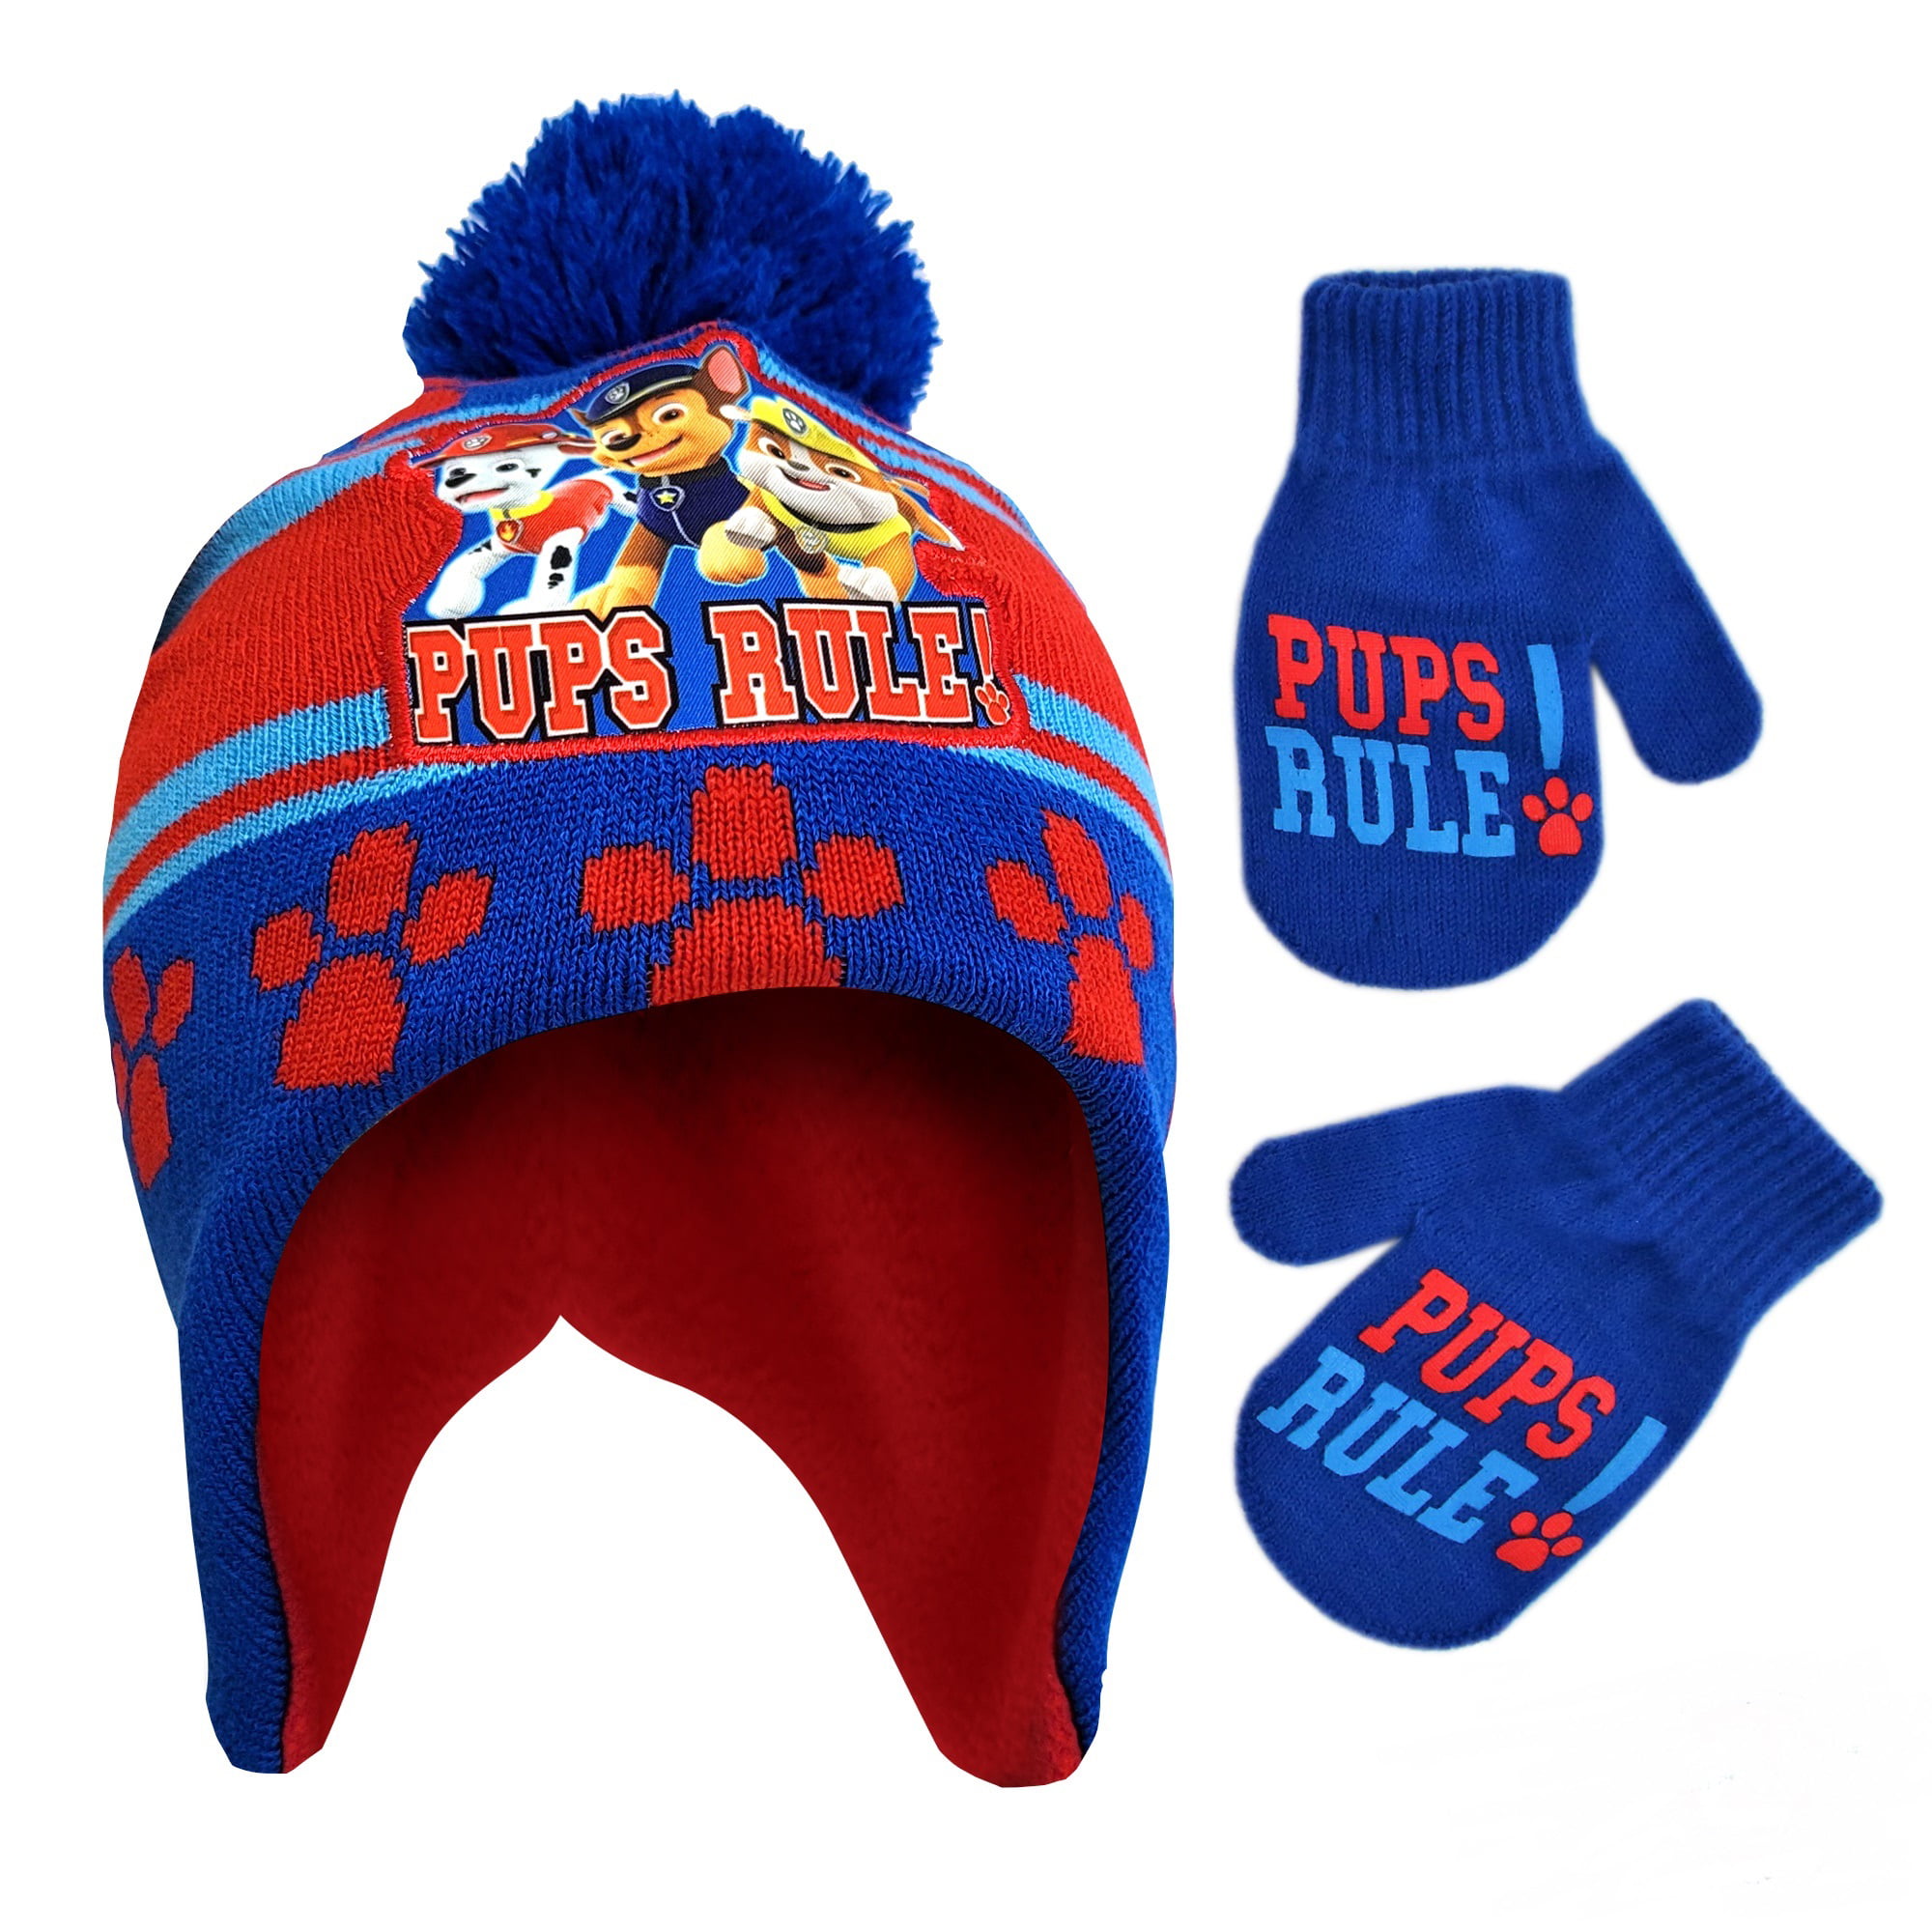 Paw Patrol Knitted Blue Navy Winter Hat & Gloves Set Toddlers Boys One Size 